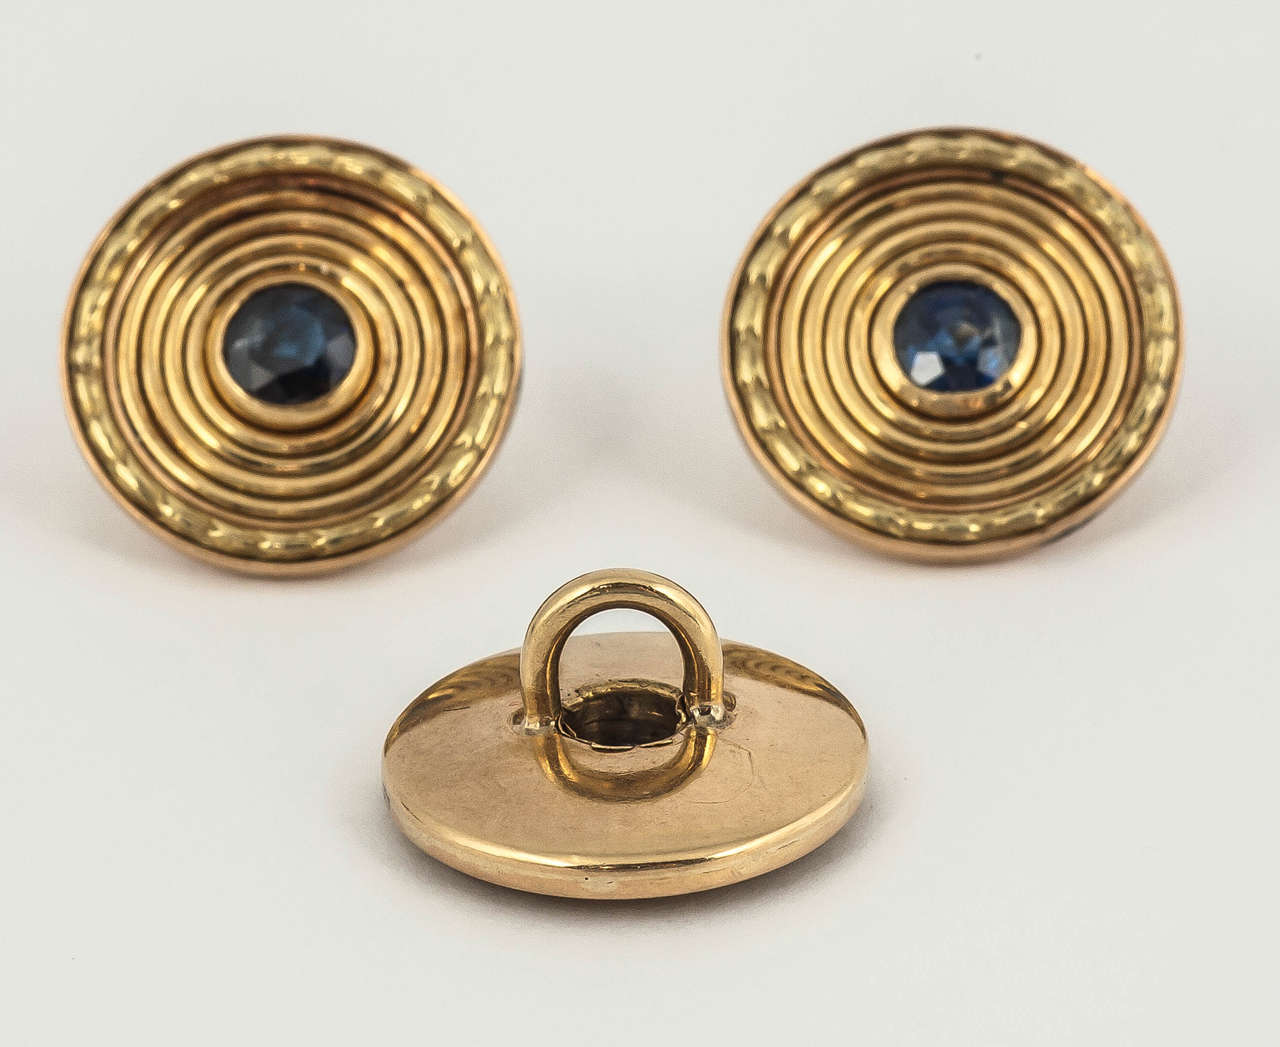 A heavy pair of 18 carat yellow gold double sided cufflinks and three matching buttons. All have a central faceted sapphire and are bordered in green gold. One side of the cufflink is a slightly smaller diameter than the other.
The larger cufflink